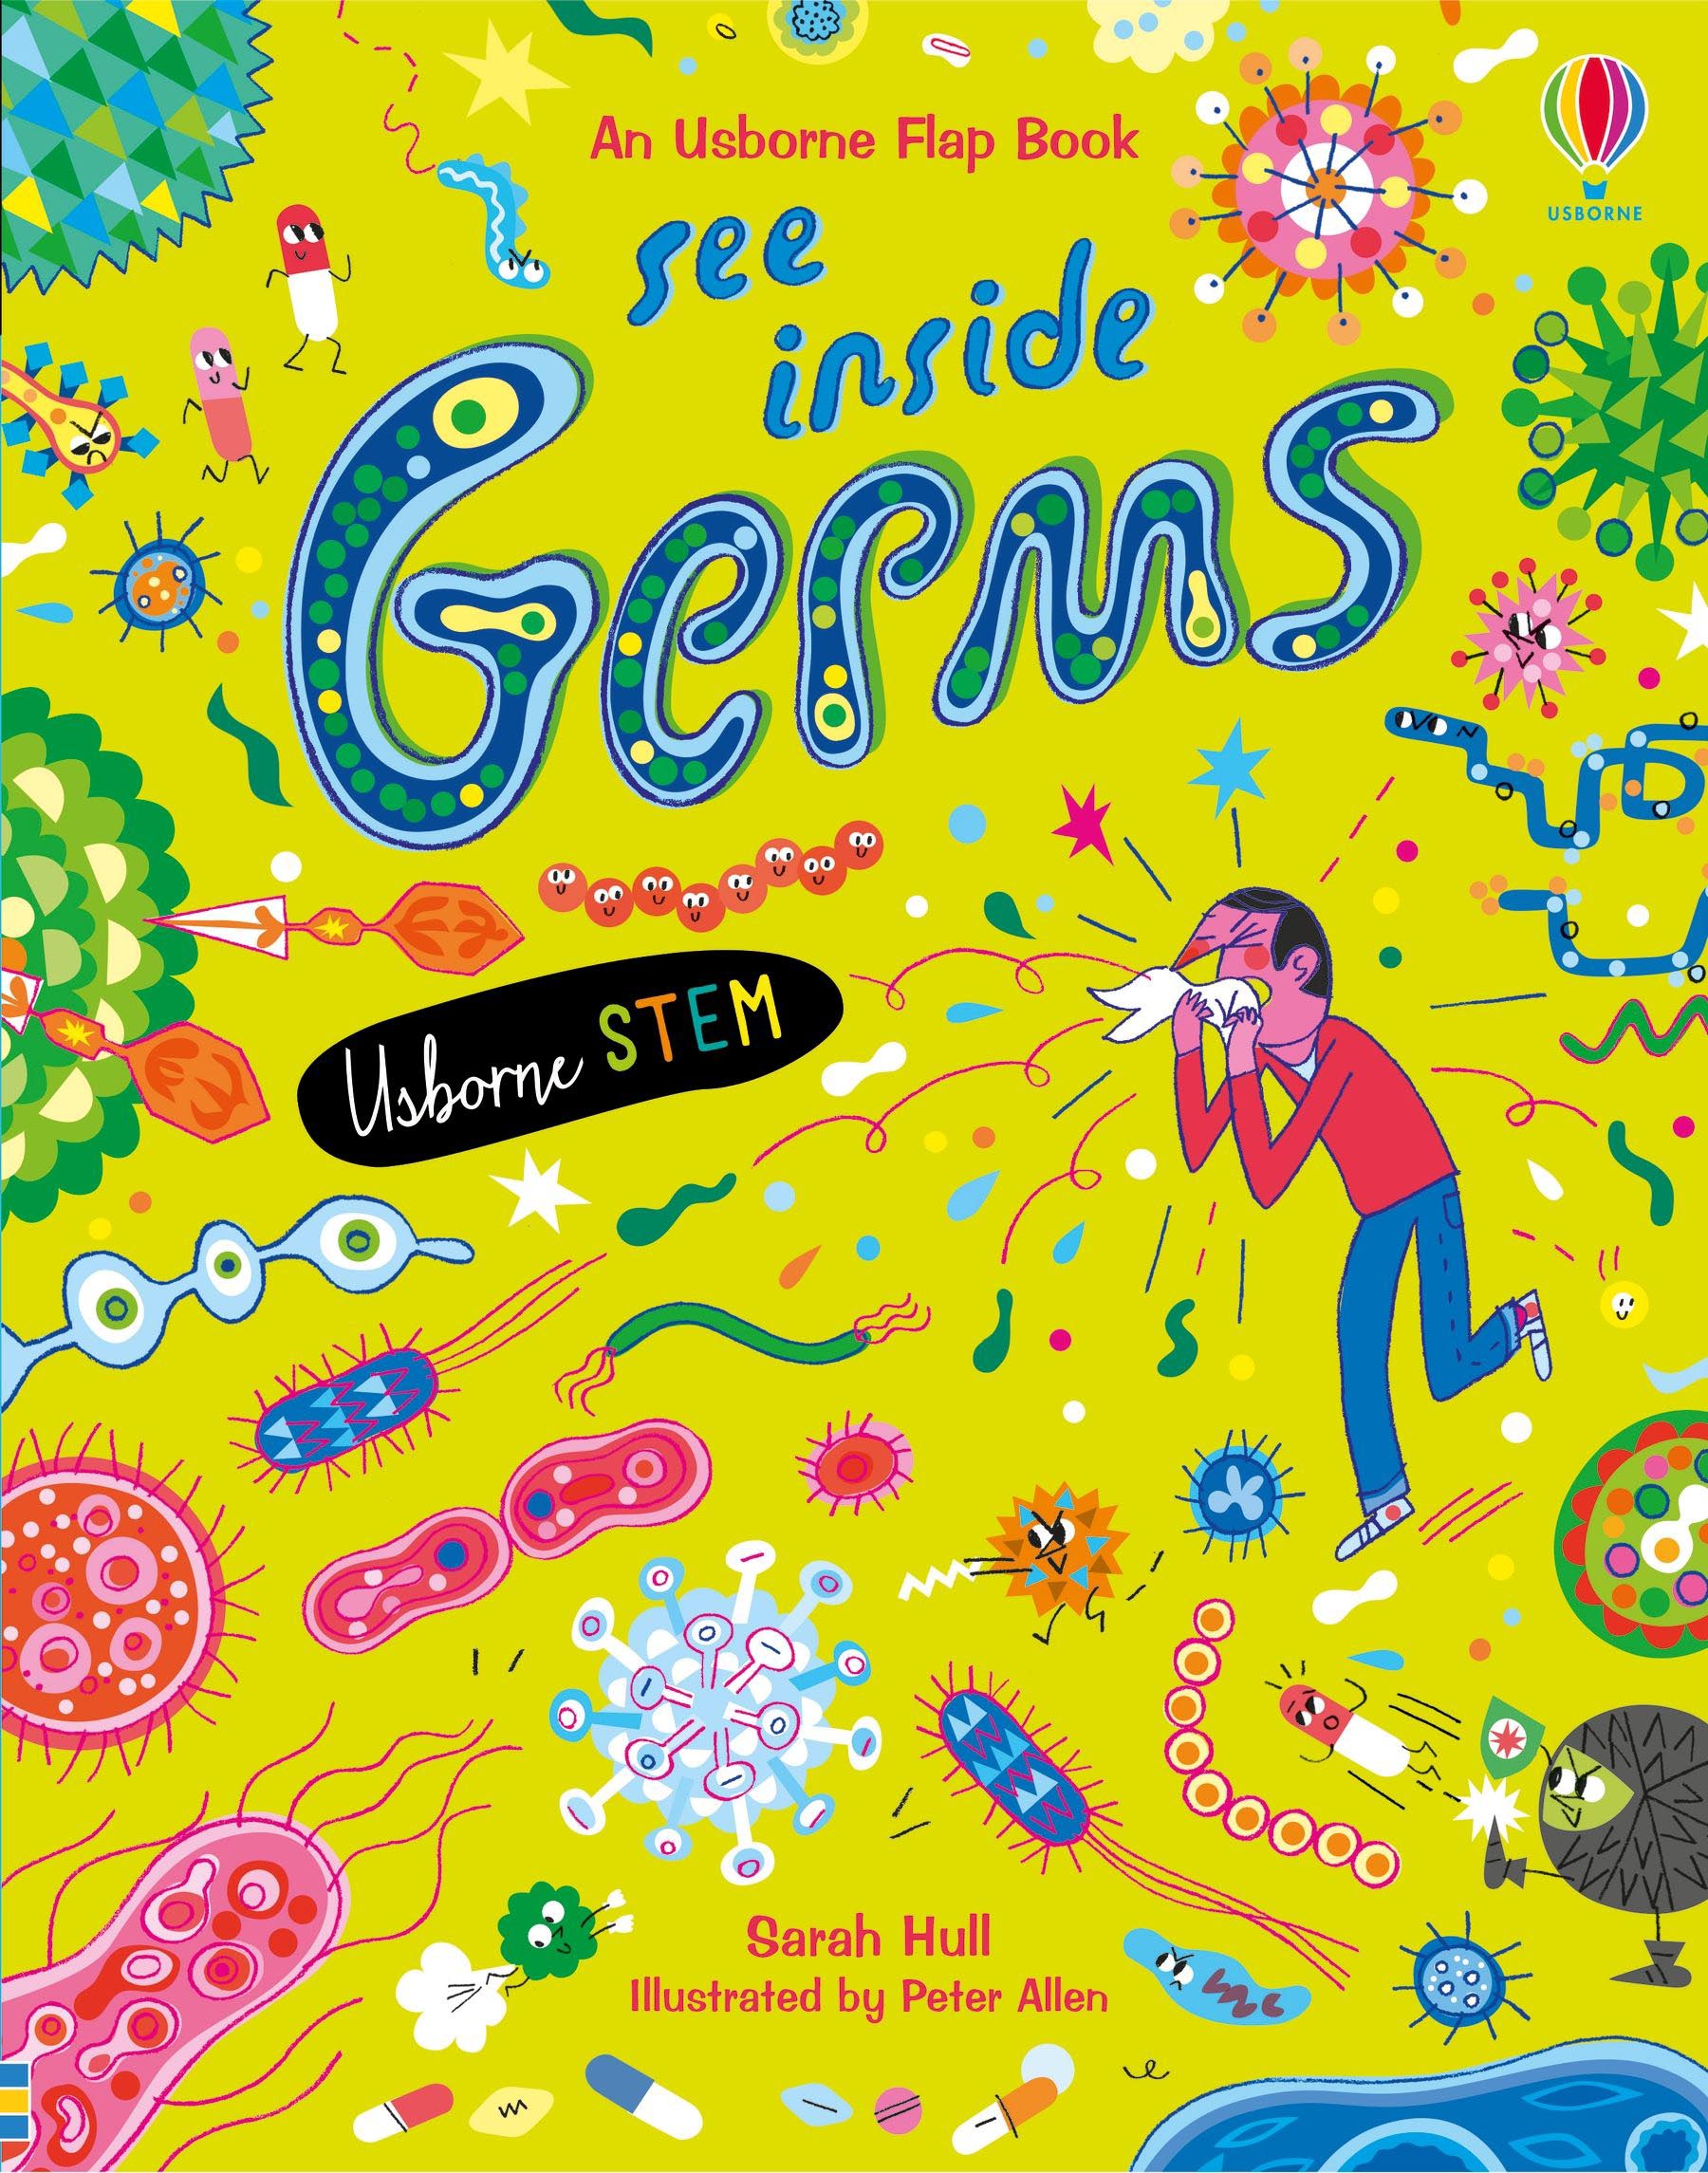 An Usborne Flap Book See Inside Germs